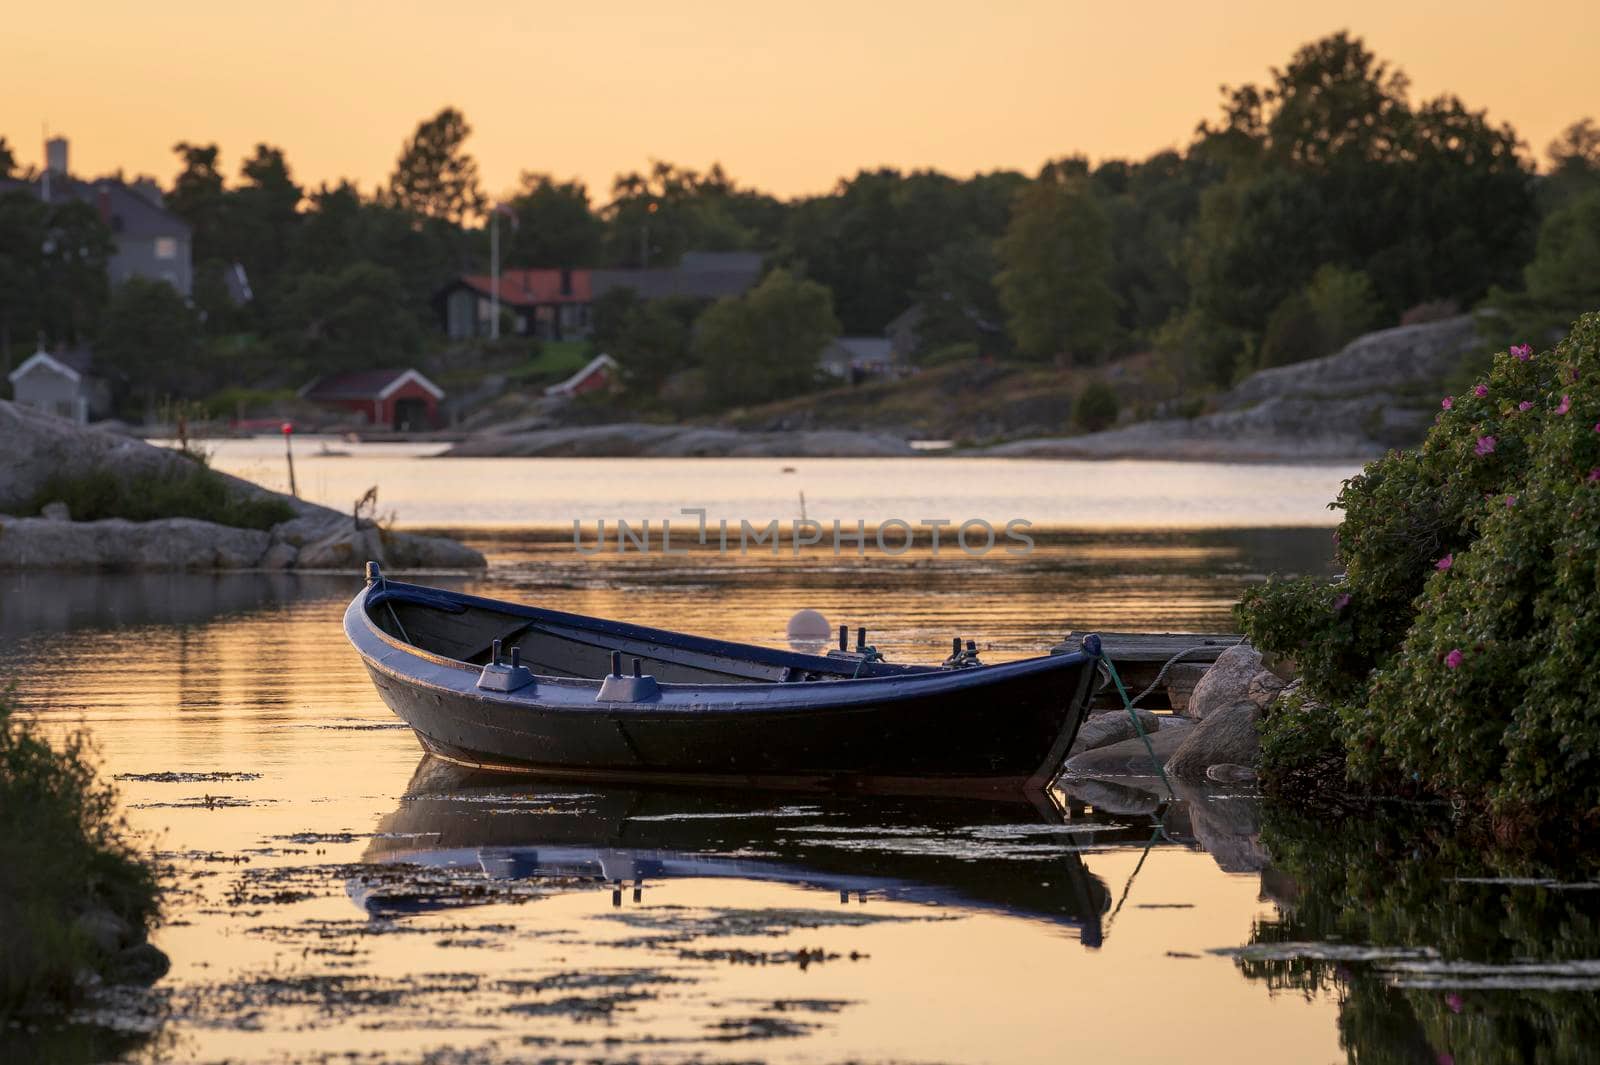 A boat on the lake near a dock, Sunset over the lake in the village. View from a wooden bridge with a boat aside